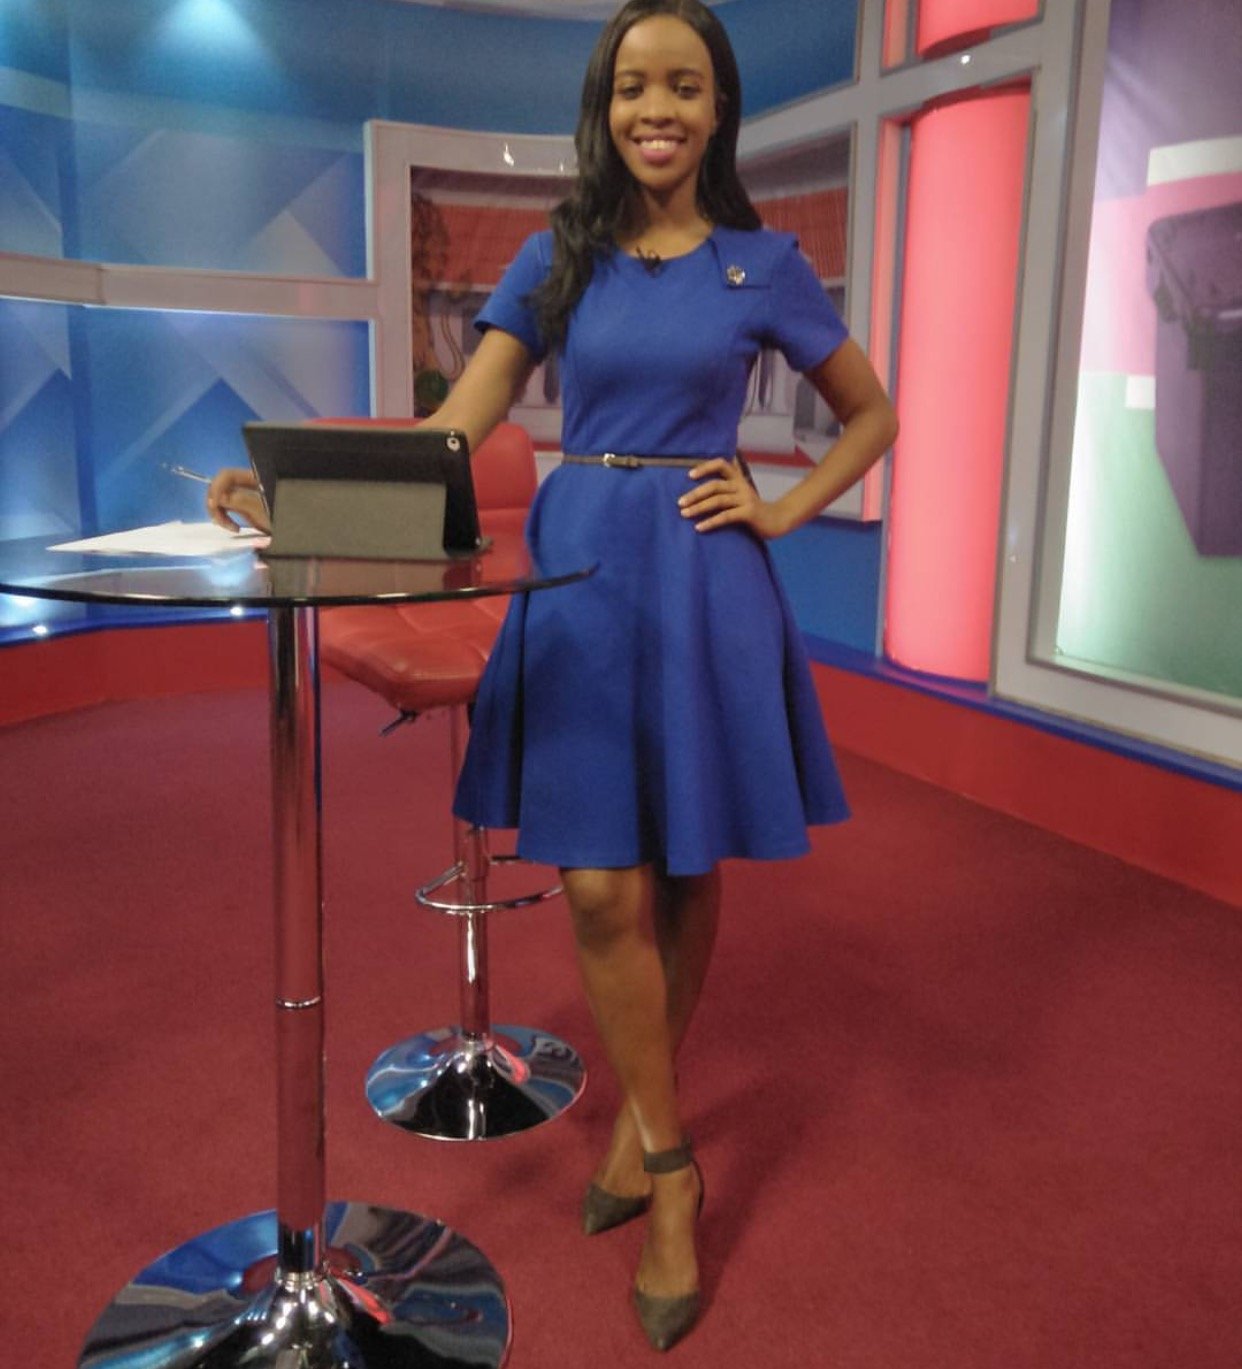 KTN news anchor shows off her baby bump a few months after her traditional wedding!